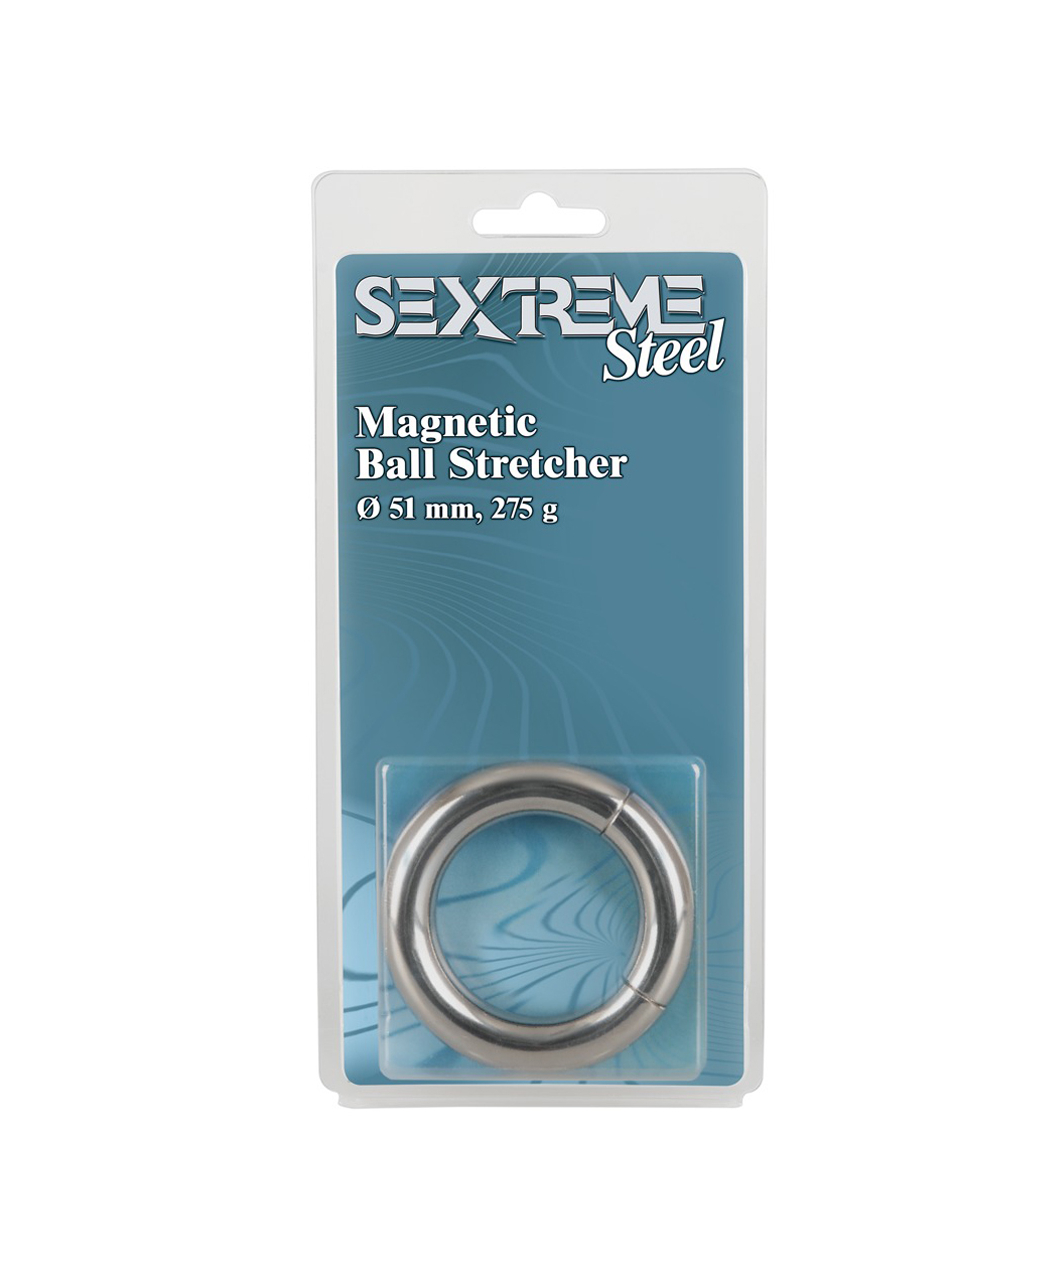 Sextreme Magnetic Ball Stretcher